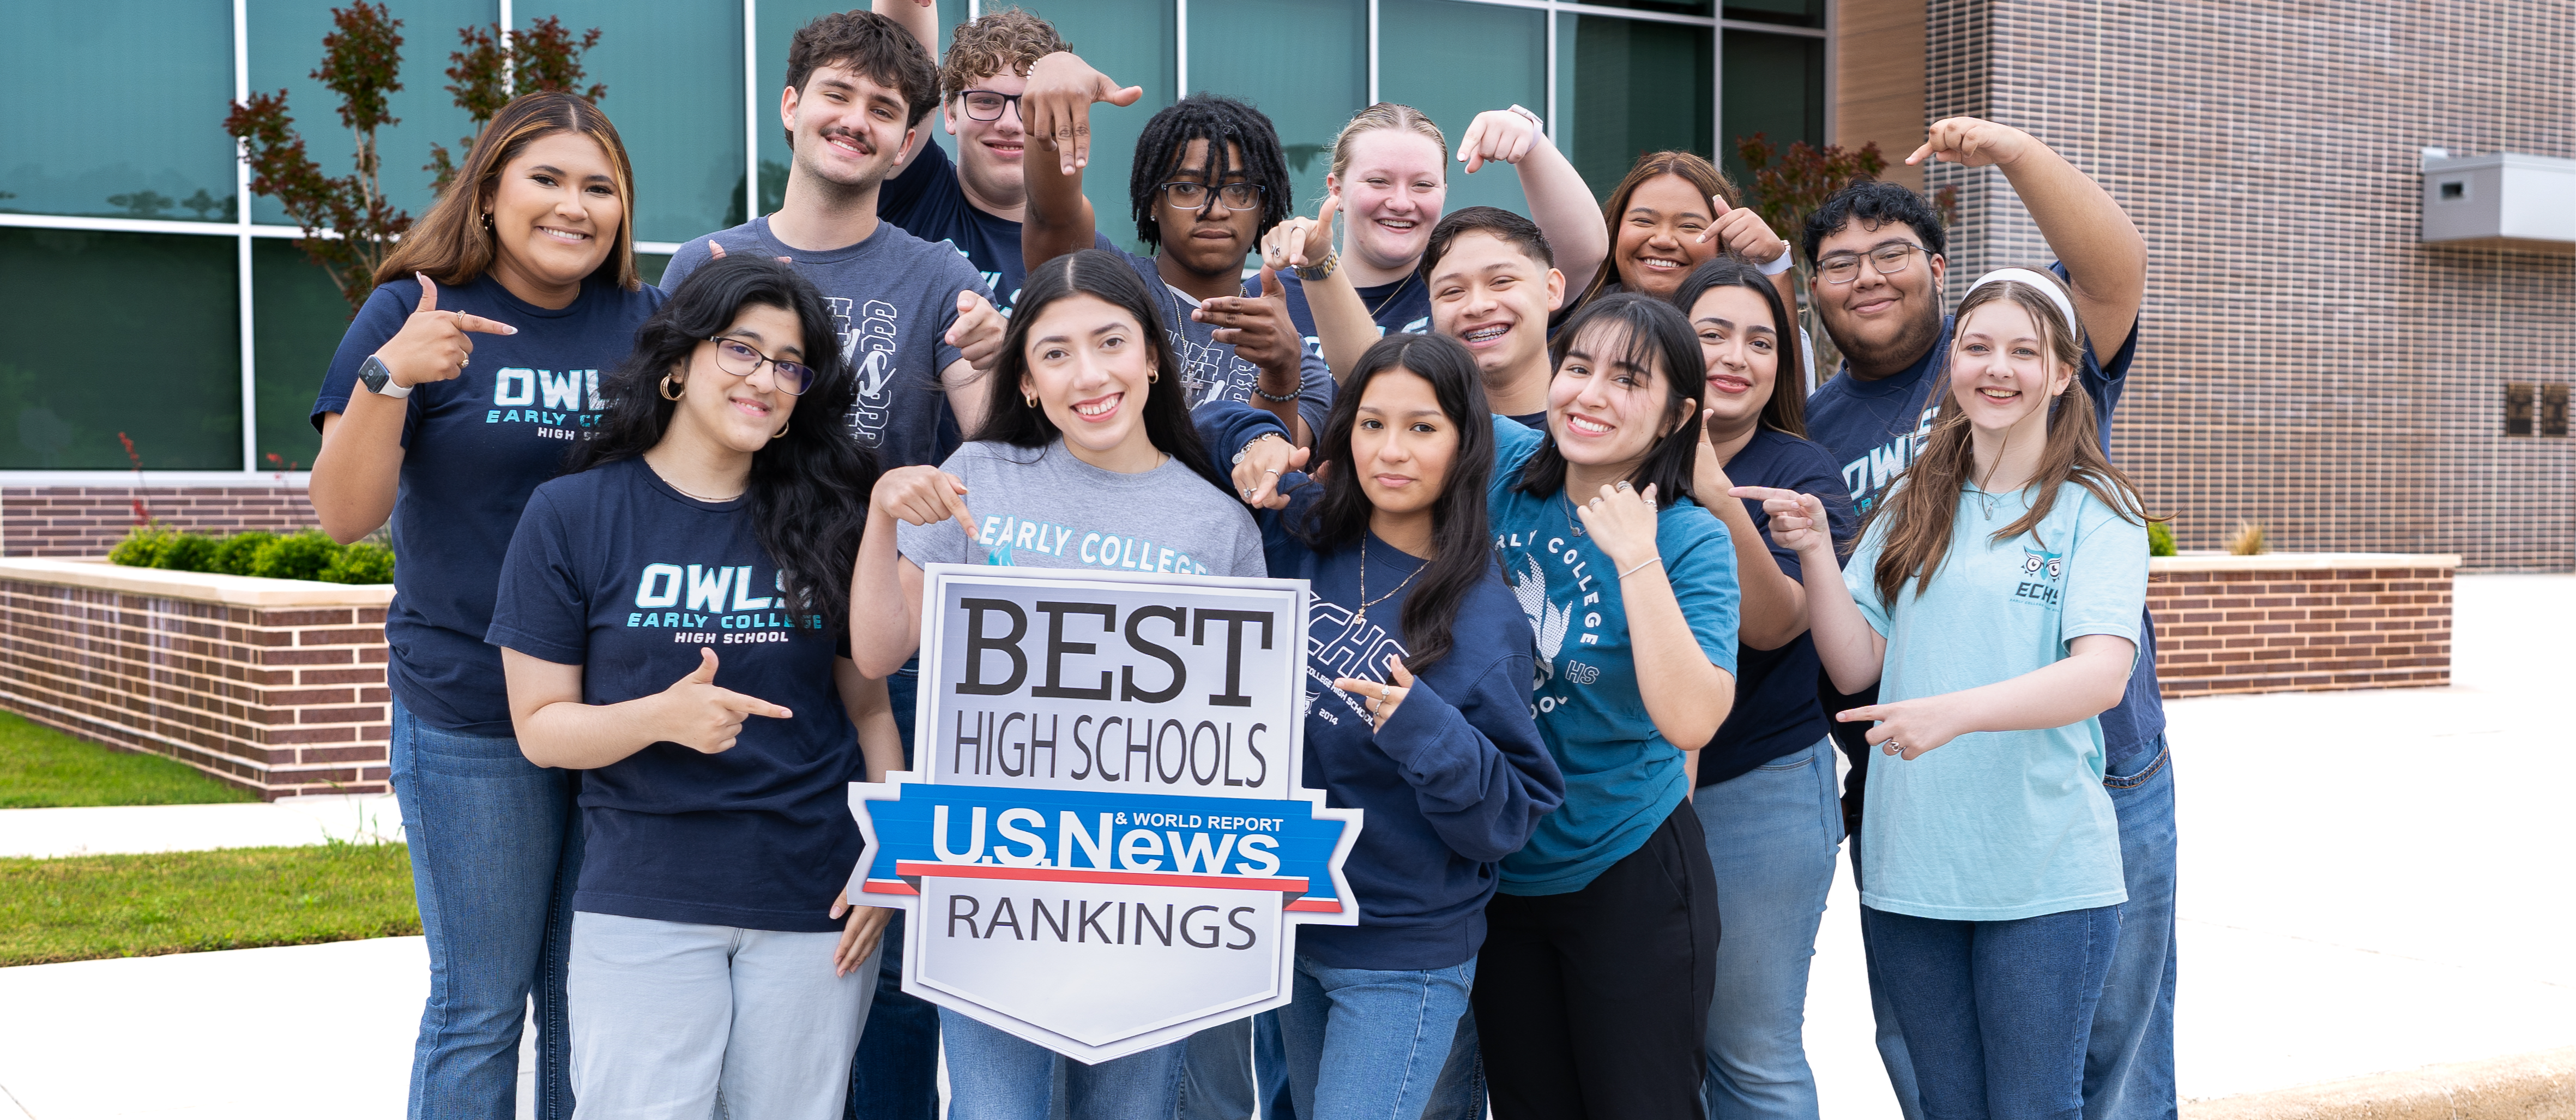 students posing with U.S. news sign